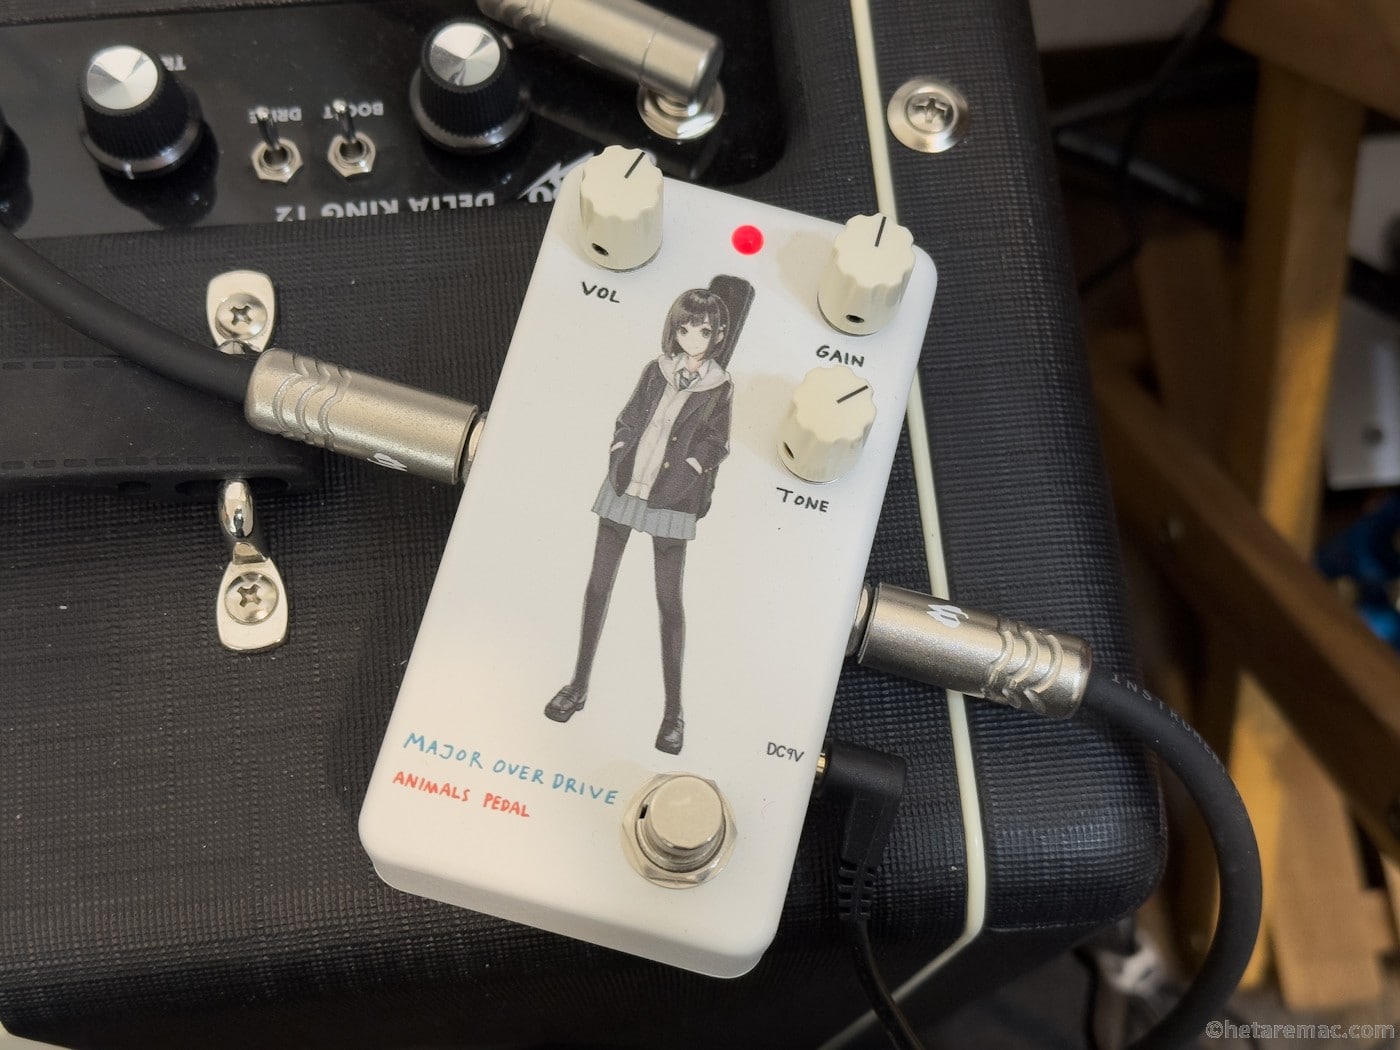 Animals Pedal Custom Illustrated Major Overdrive by あしやひろ “ボブカット”